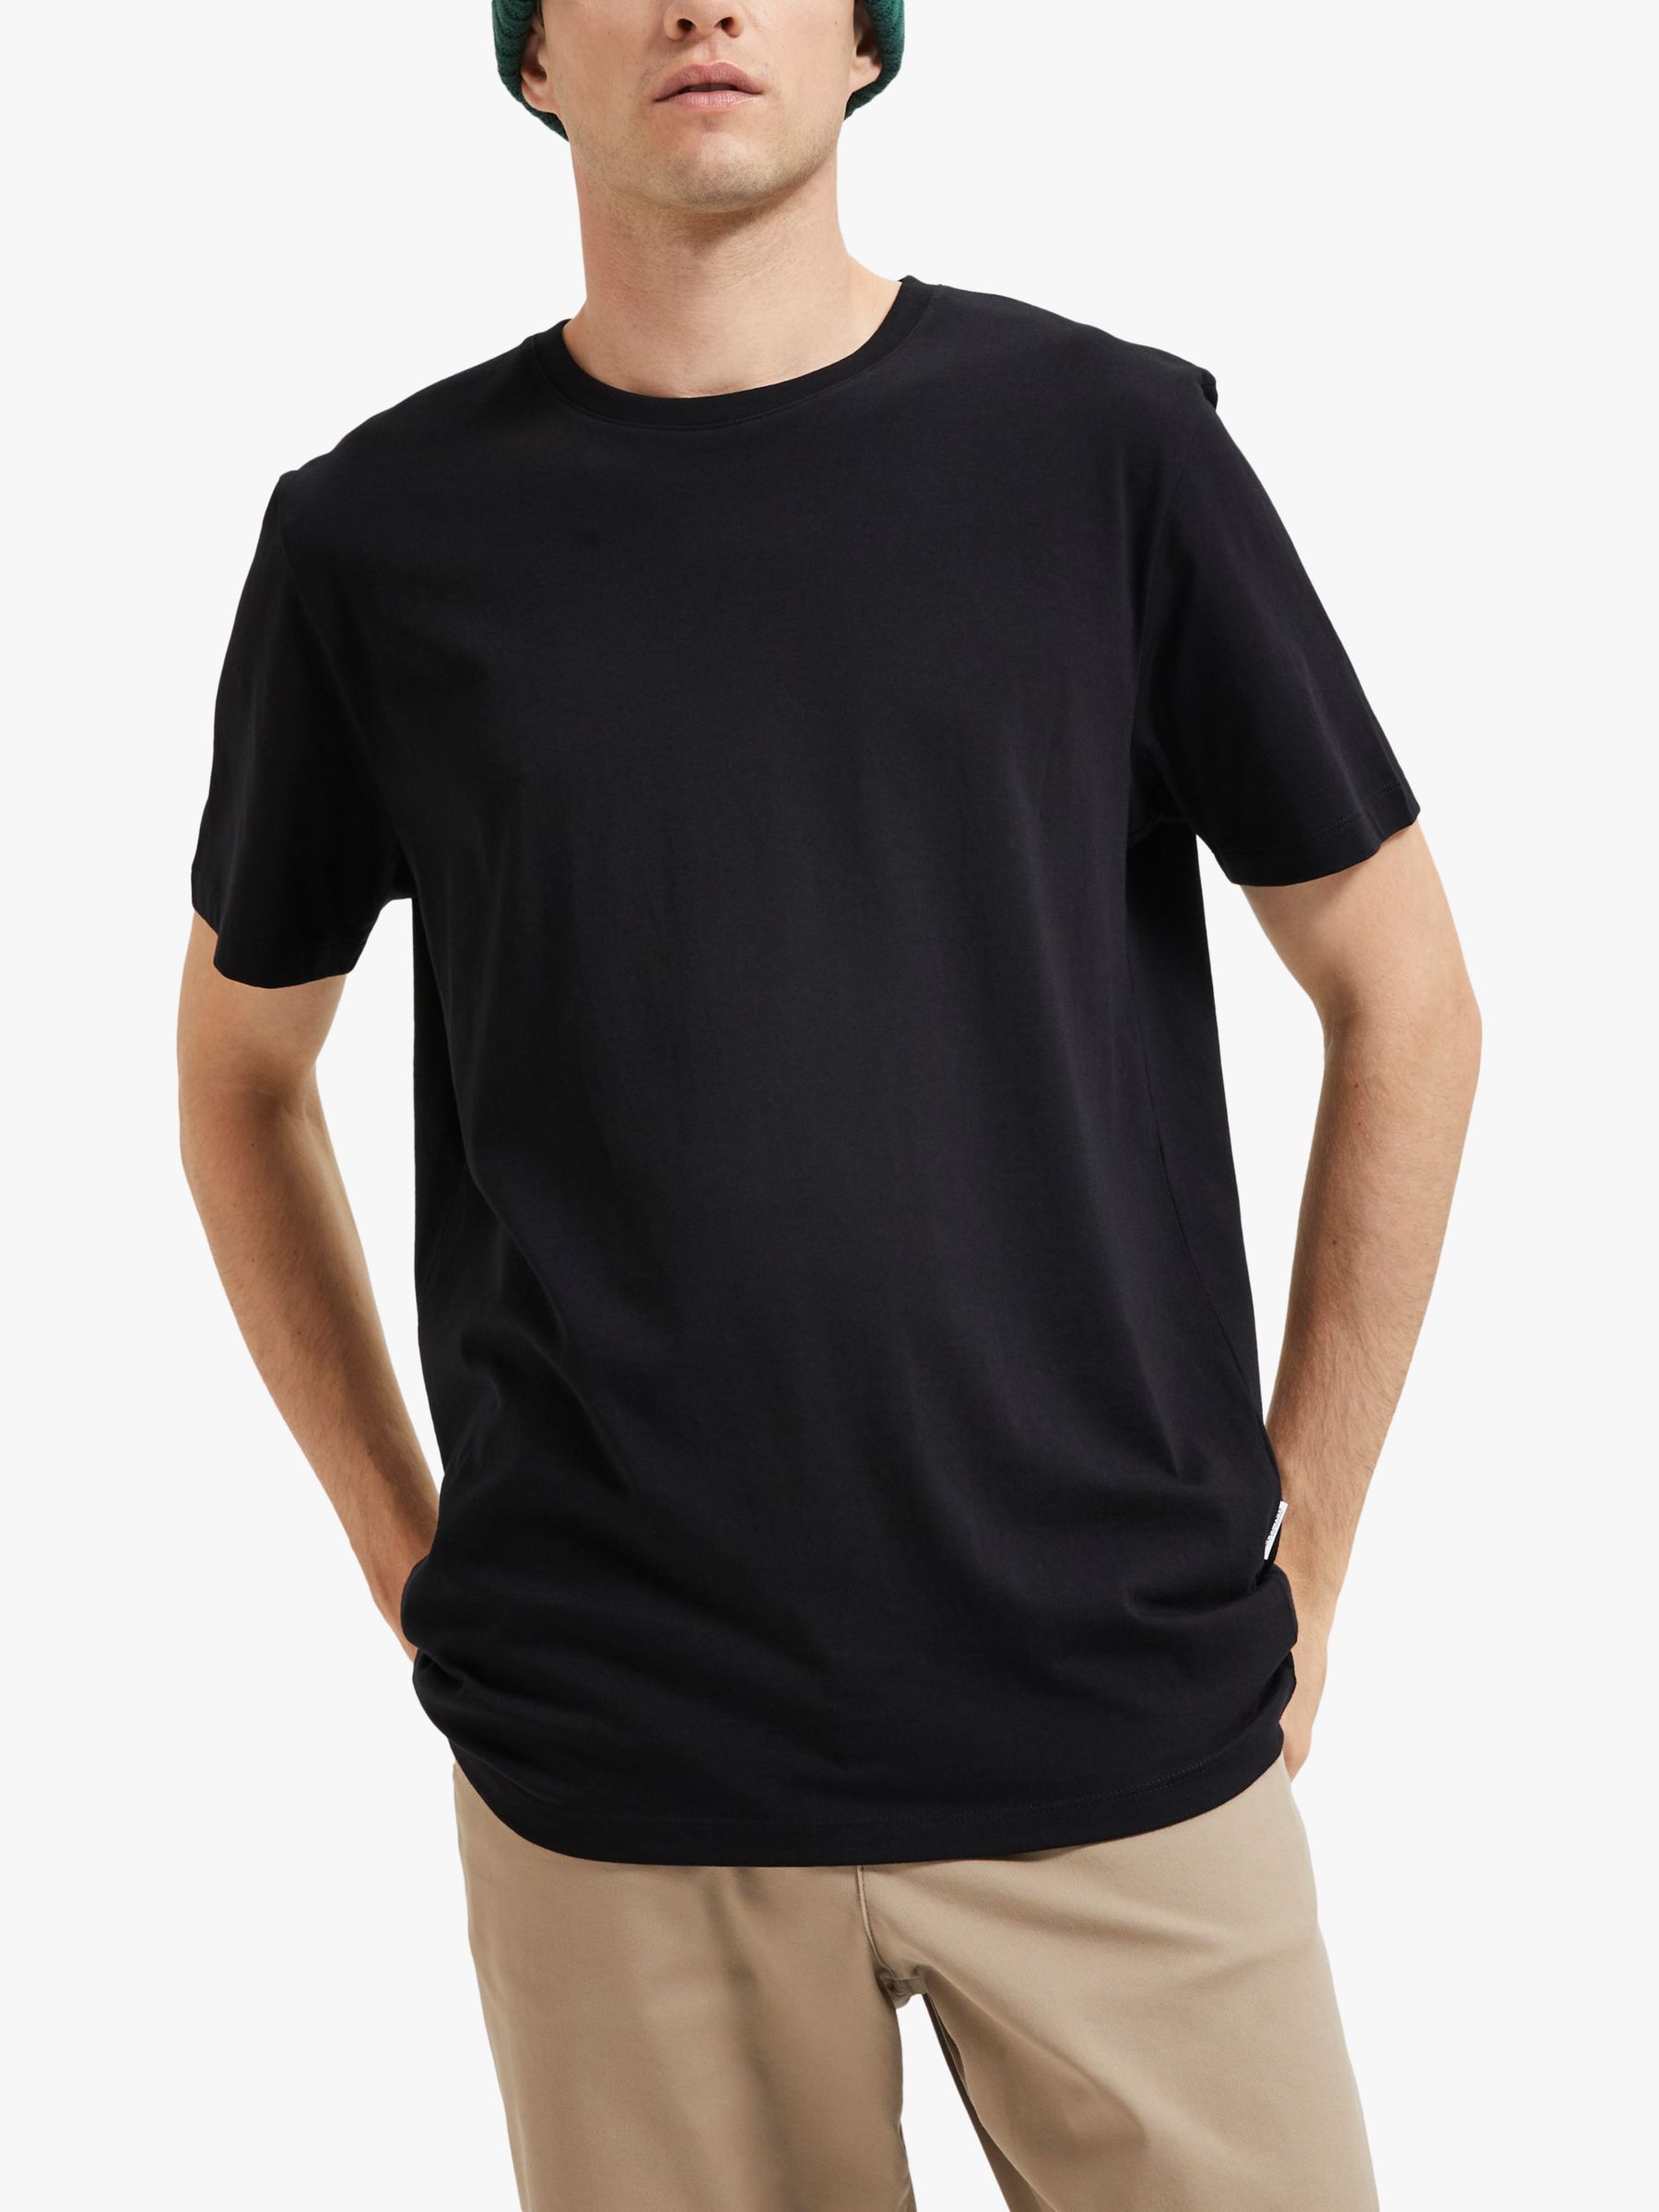 SELECTED HOMME Organic Cotton T-Shirt, Black, S